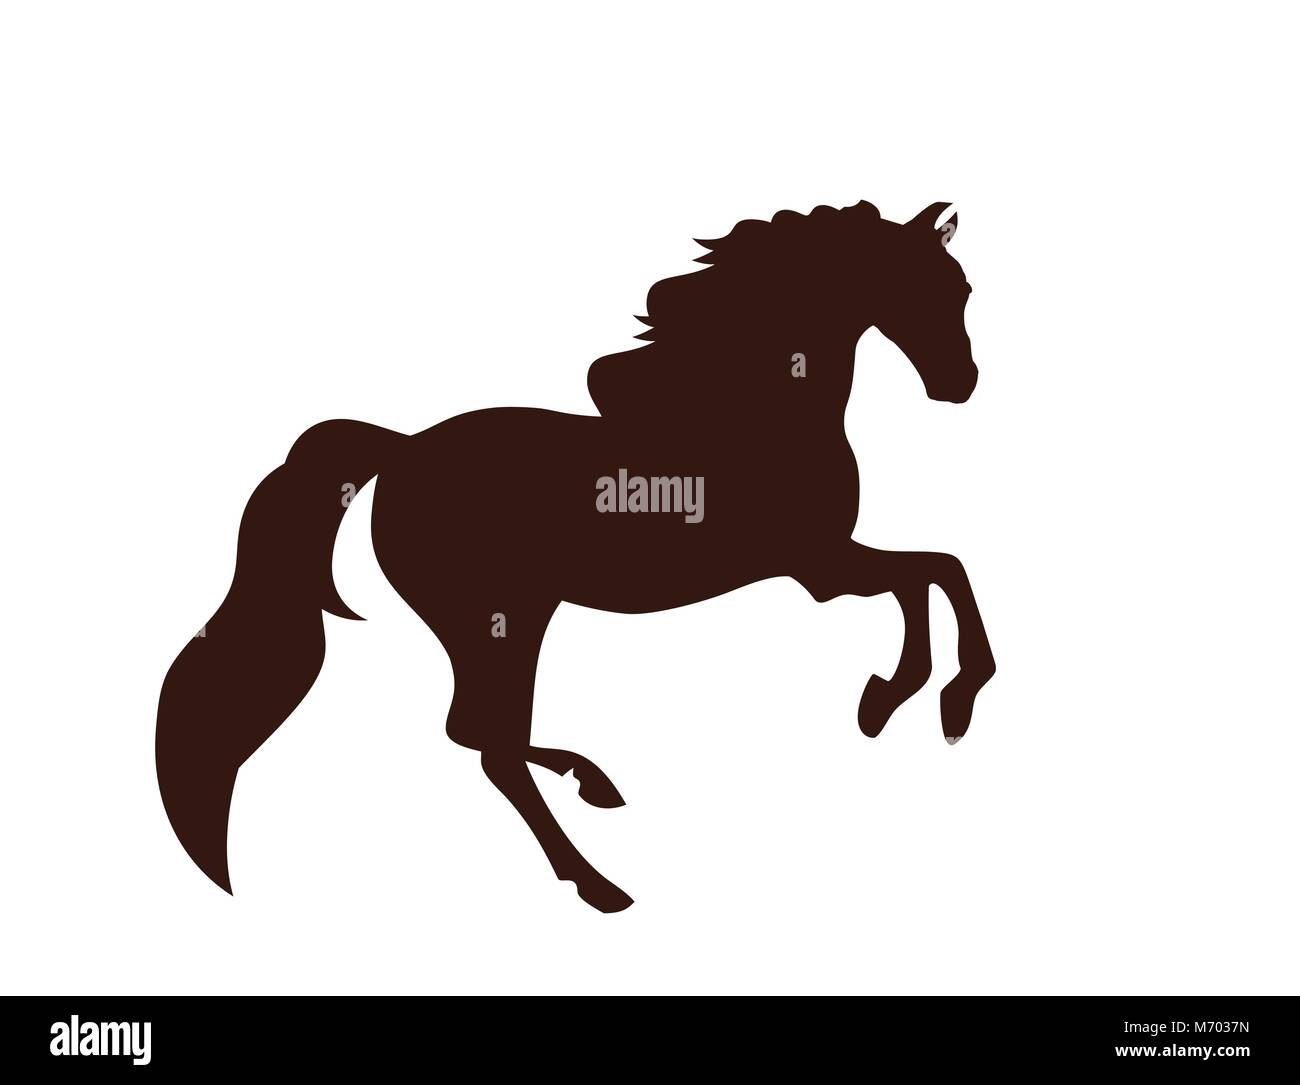 young horse in the steppe. Black silhouette of horse. White background. Stock Vector